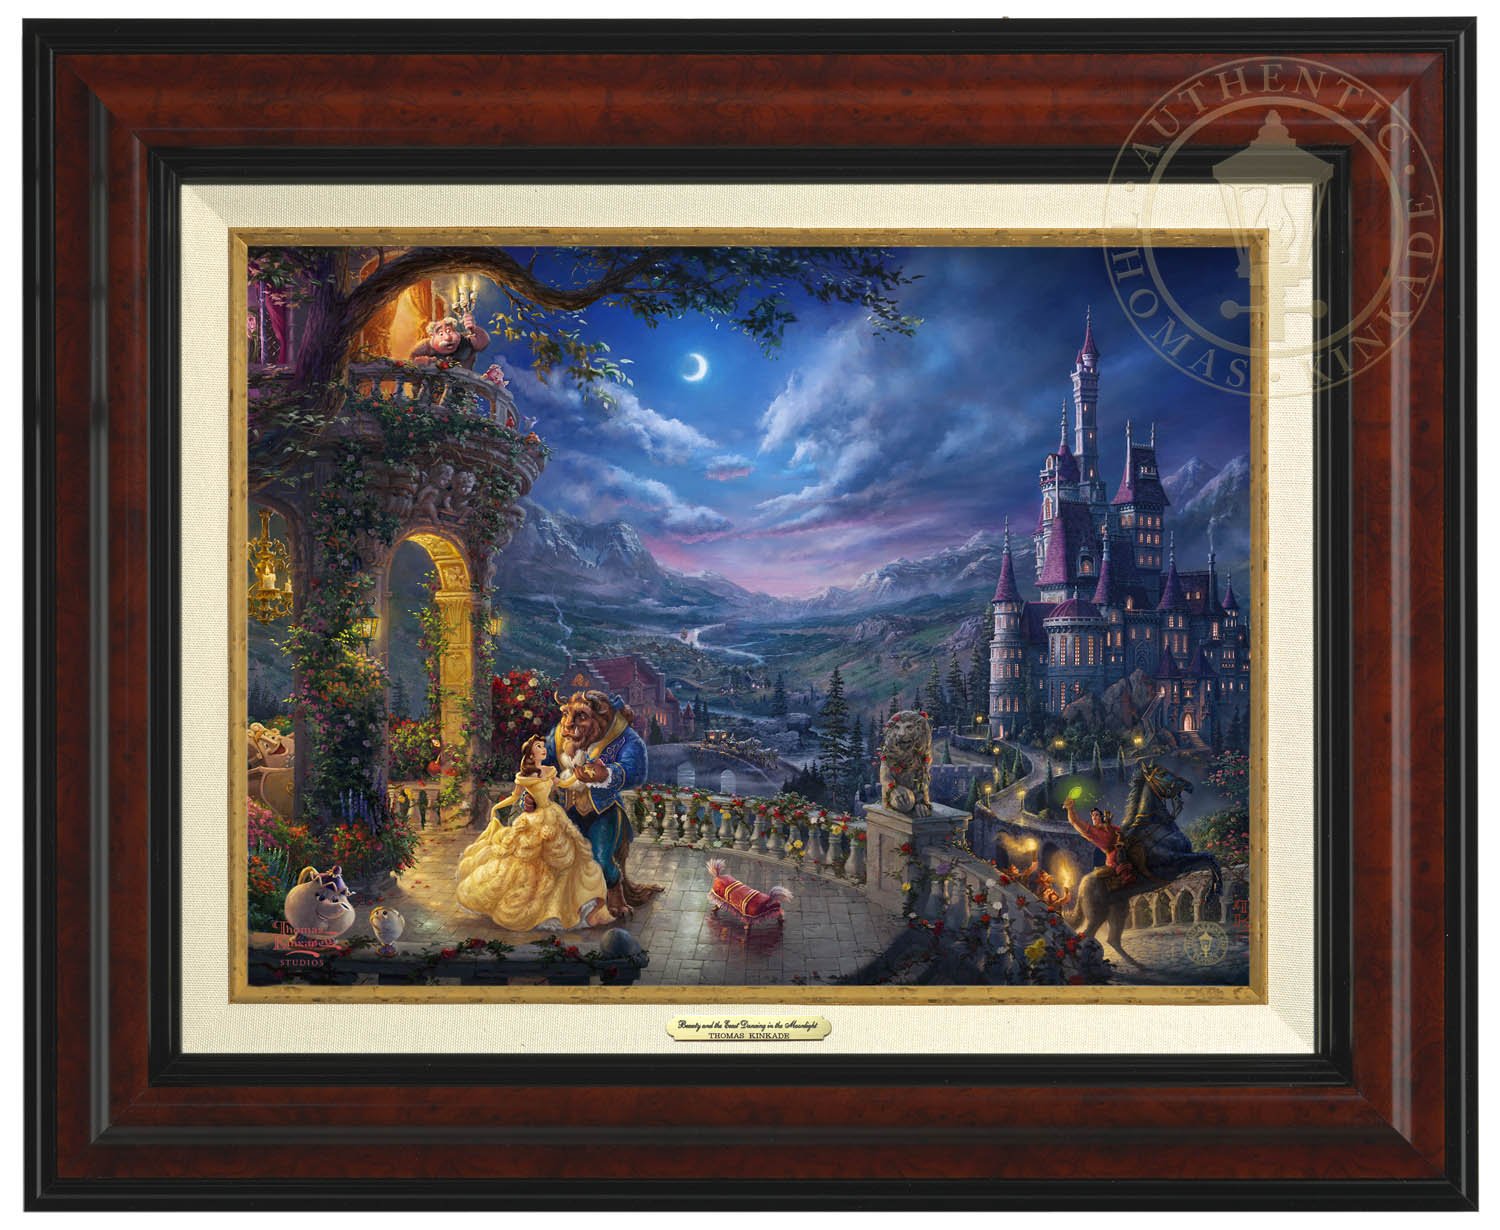 Belle and the Beast celebrate their love under the dreamy moonlit sky, with all their friend enjoying the moment - Burl Frame.